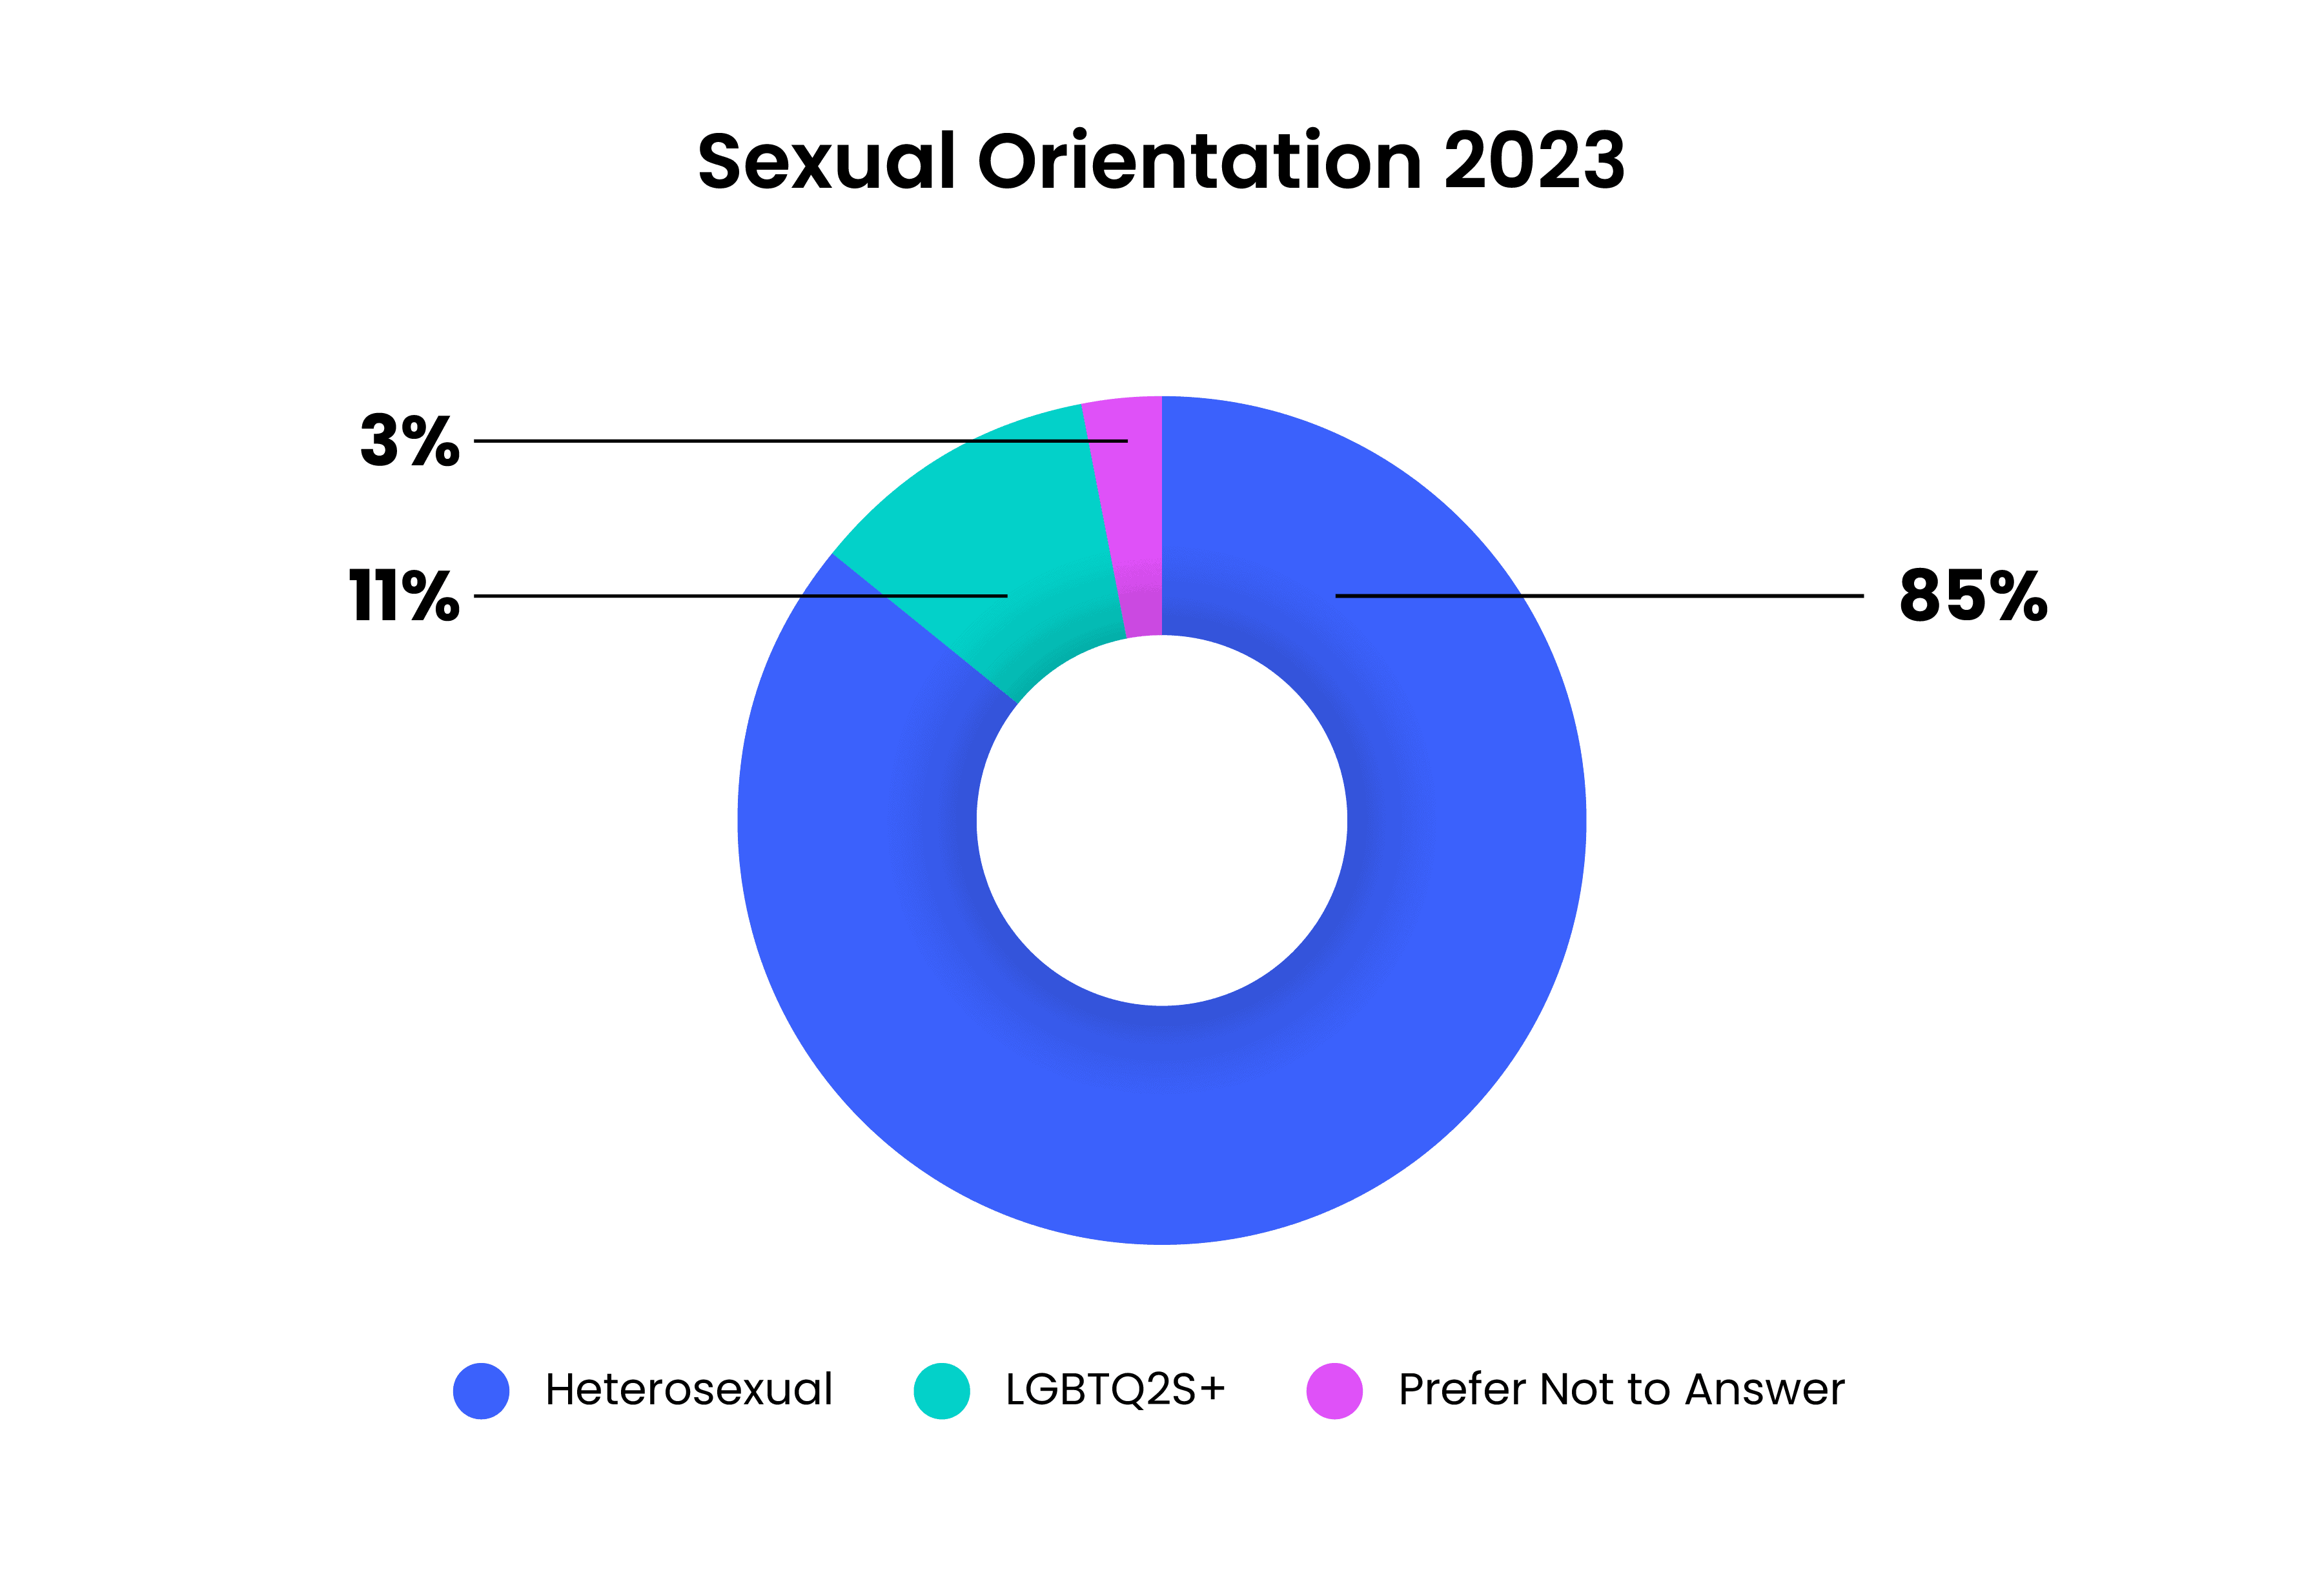 Sexual Representation 2023: 85% Heterosexual, 11% LGBTQ2S+, 3% Prefer Not to Answer